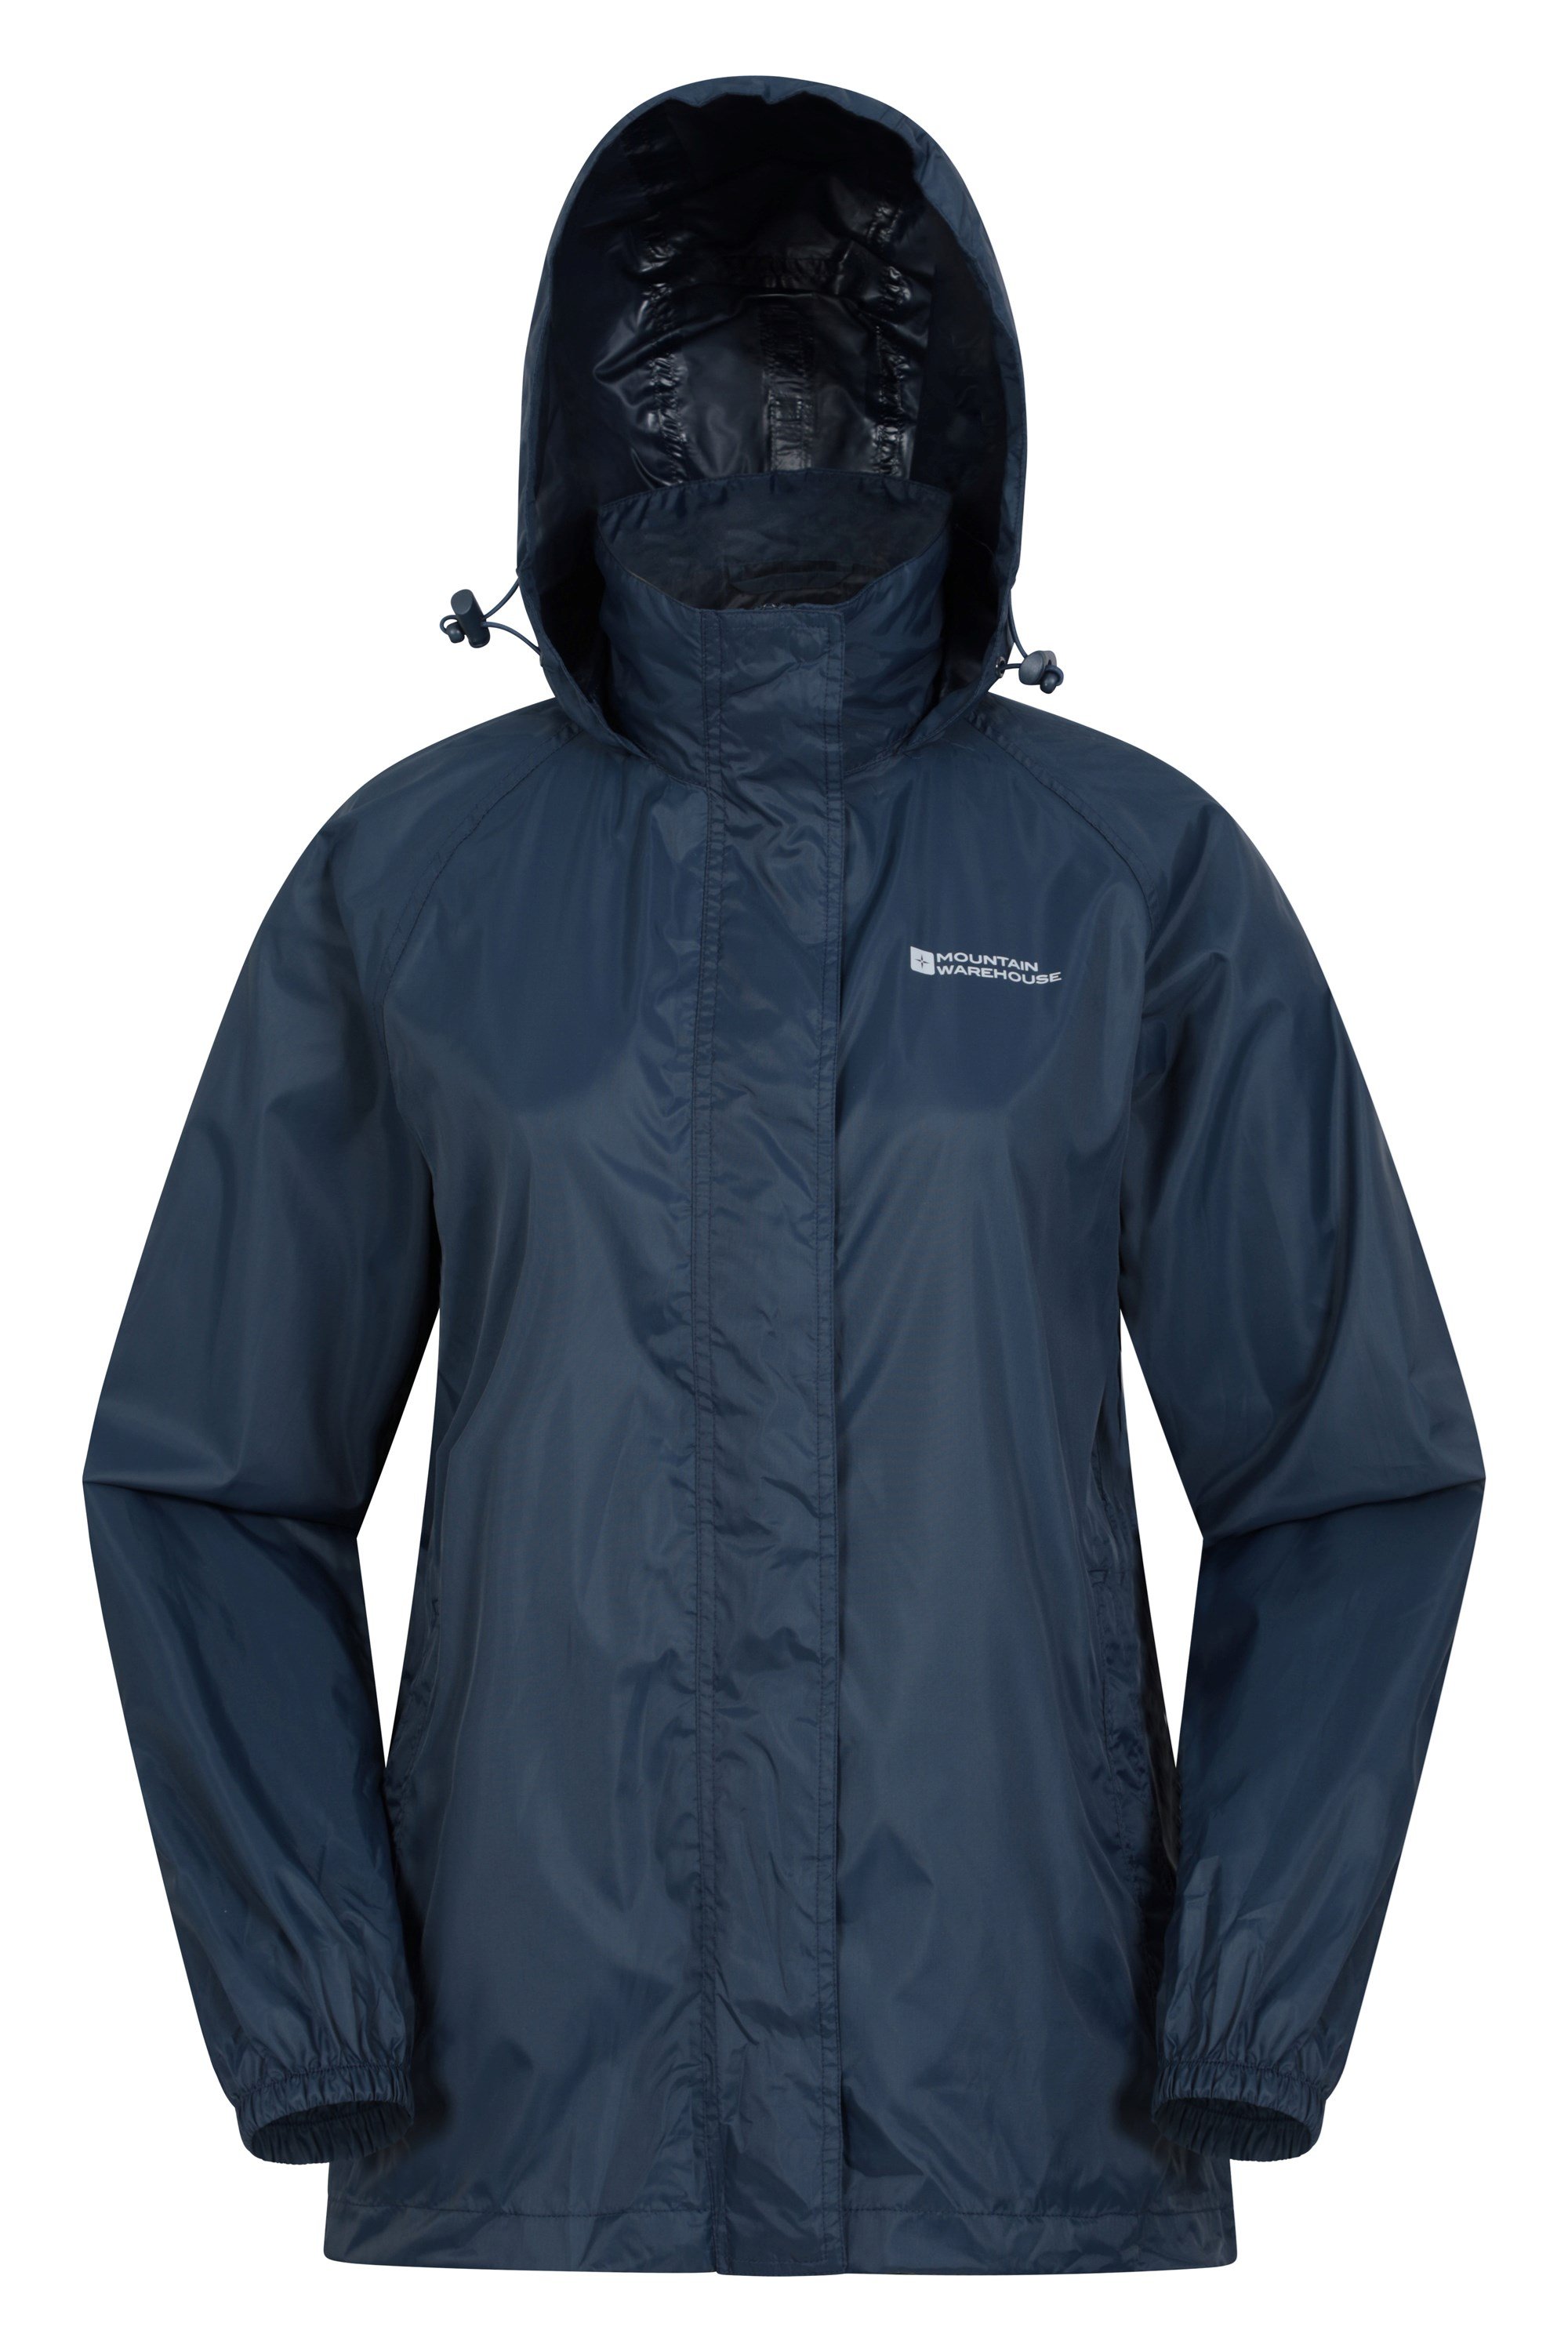 Travel Clothing | Lightweight Clothes | Mountain Warehouse US